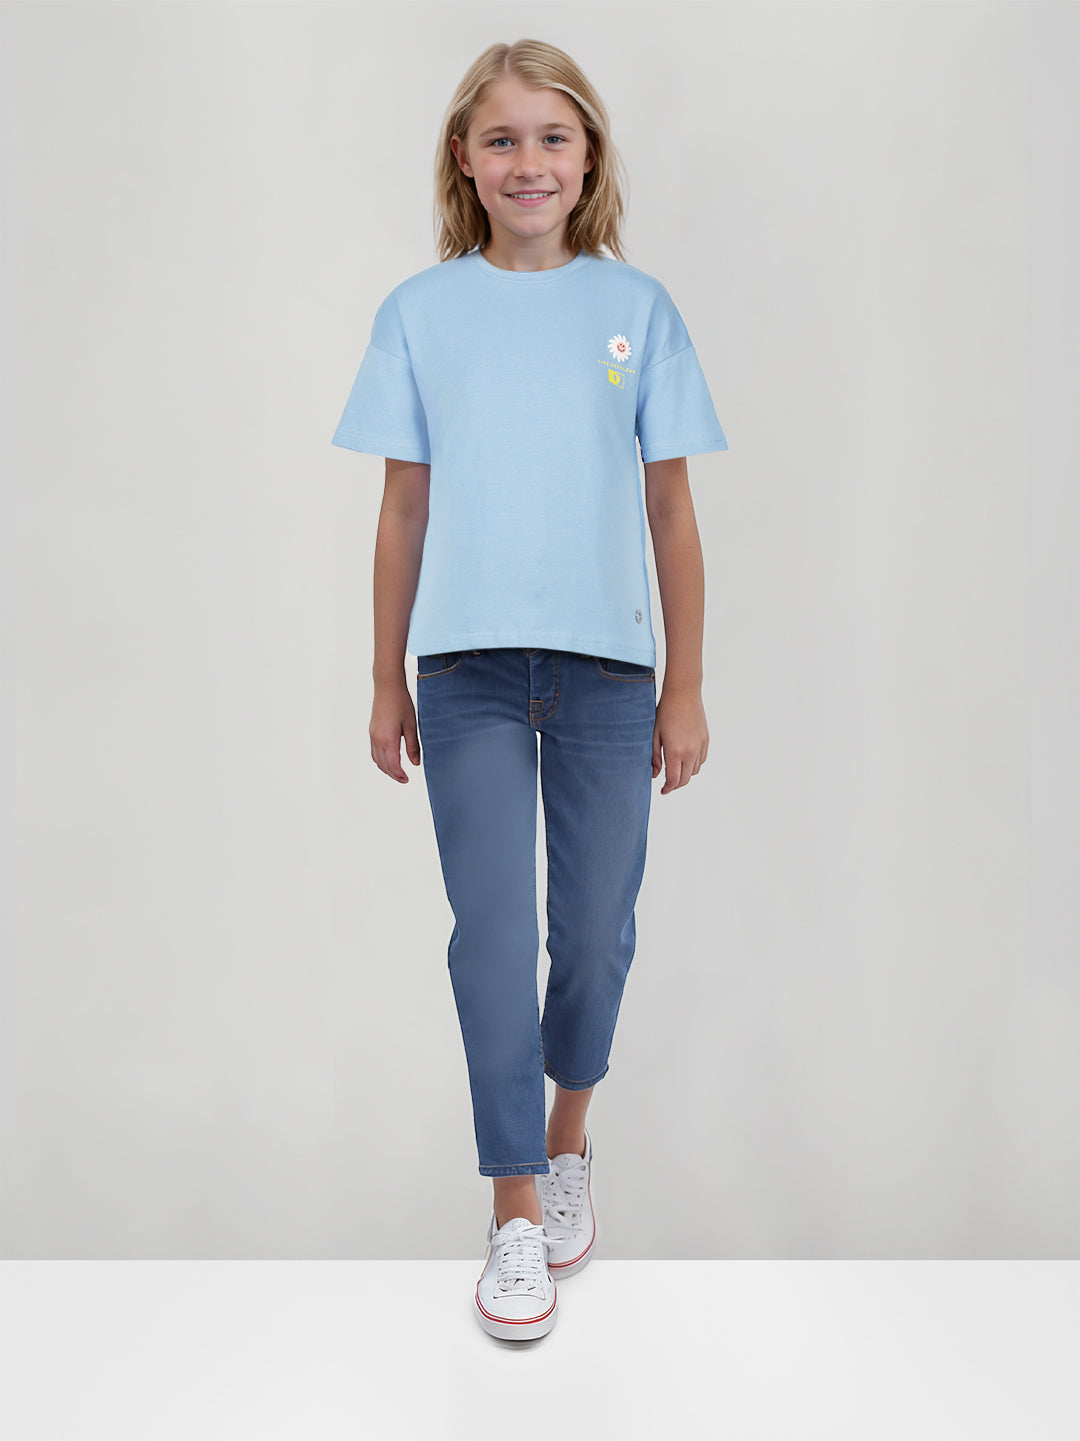 Girls Blue Solid Cotton Half Sleeves Knits Top